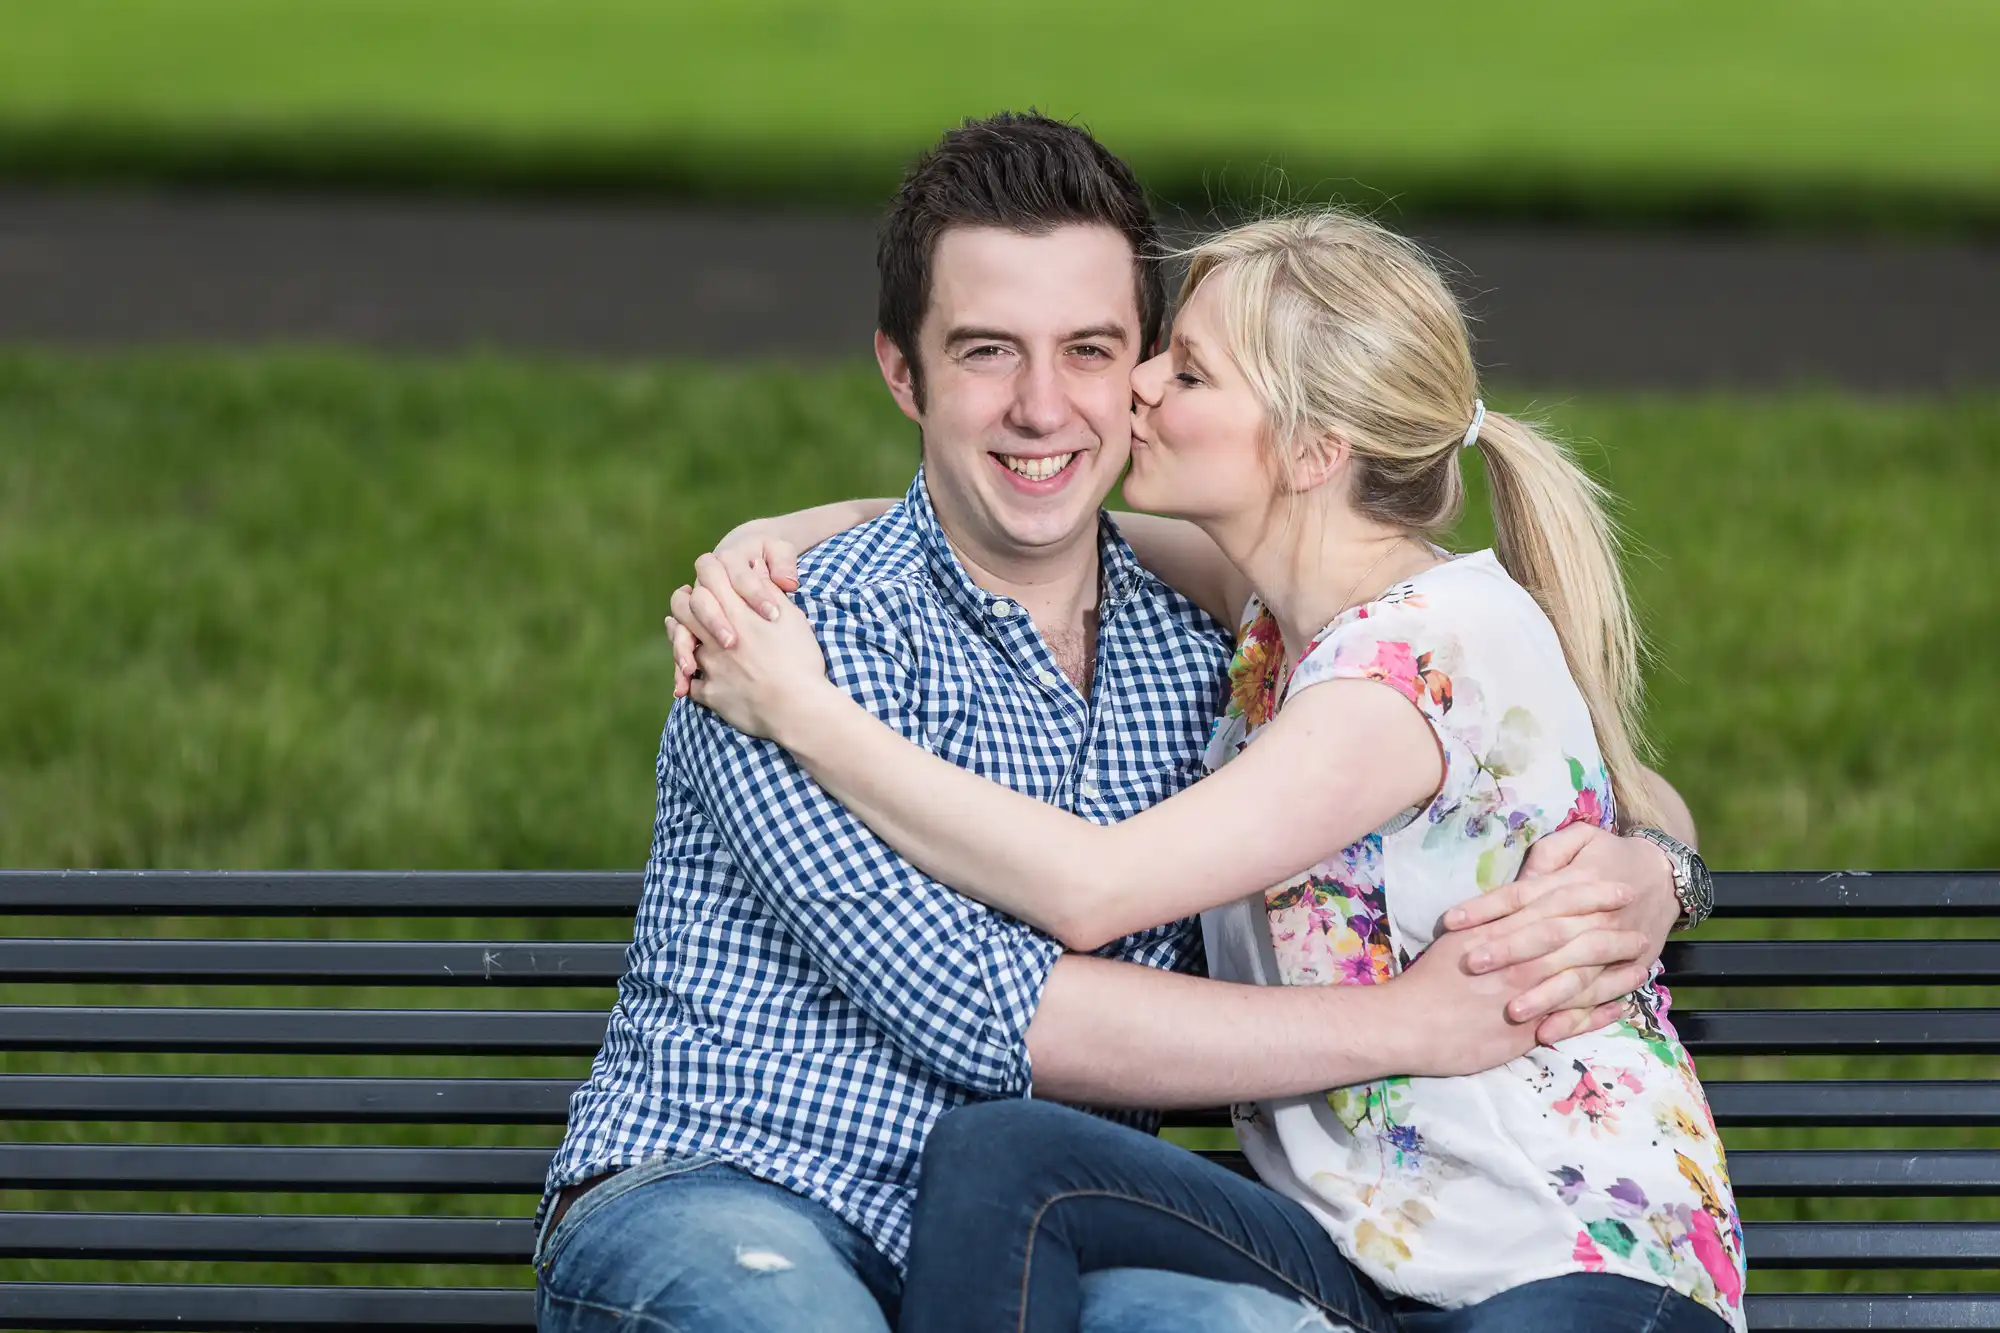 A woman kissing a smiling man on the cheek as they sit together on a park bench, with a grassy background.